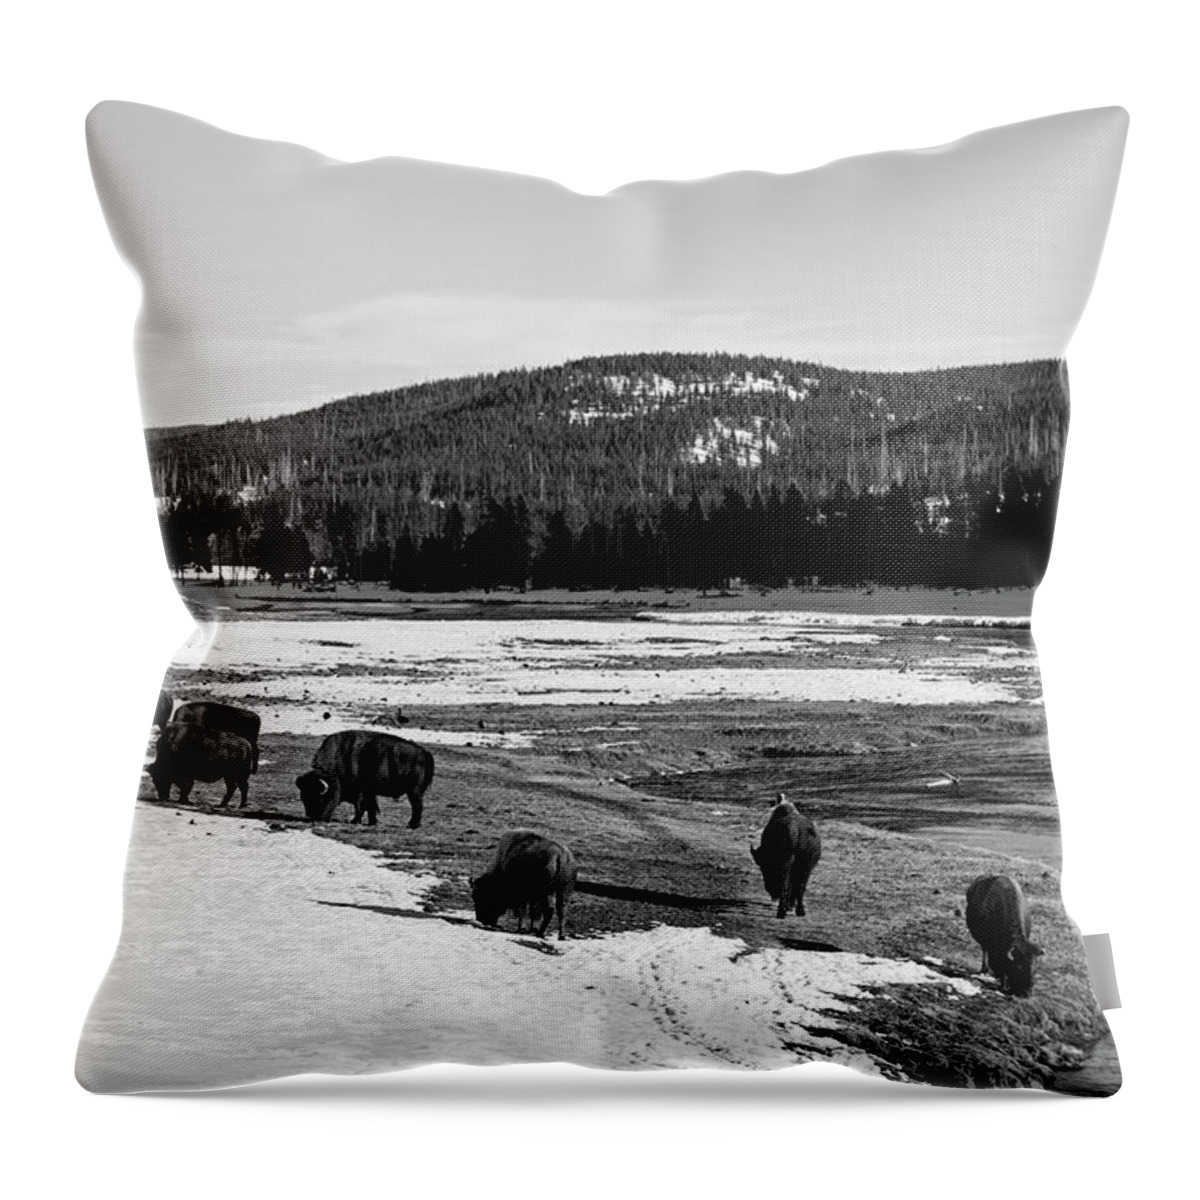 Yellowstone National Park Throw Pillow featuring the photograph Where The Buffalo Roam by Mountain Dreams